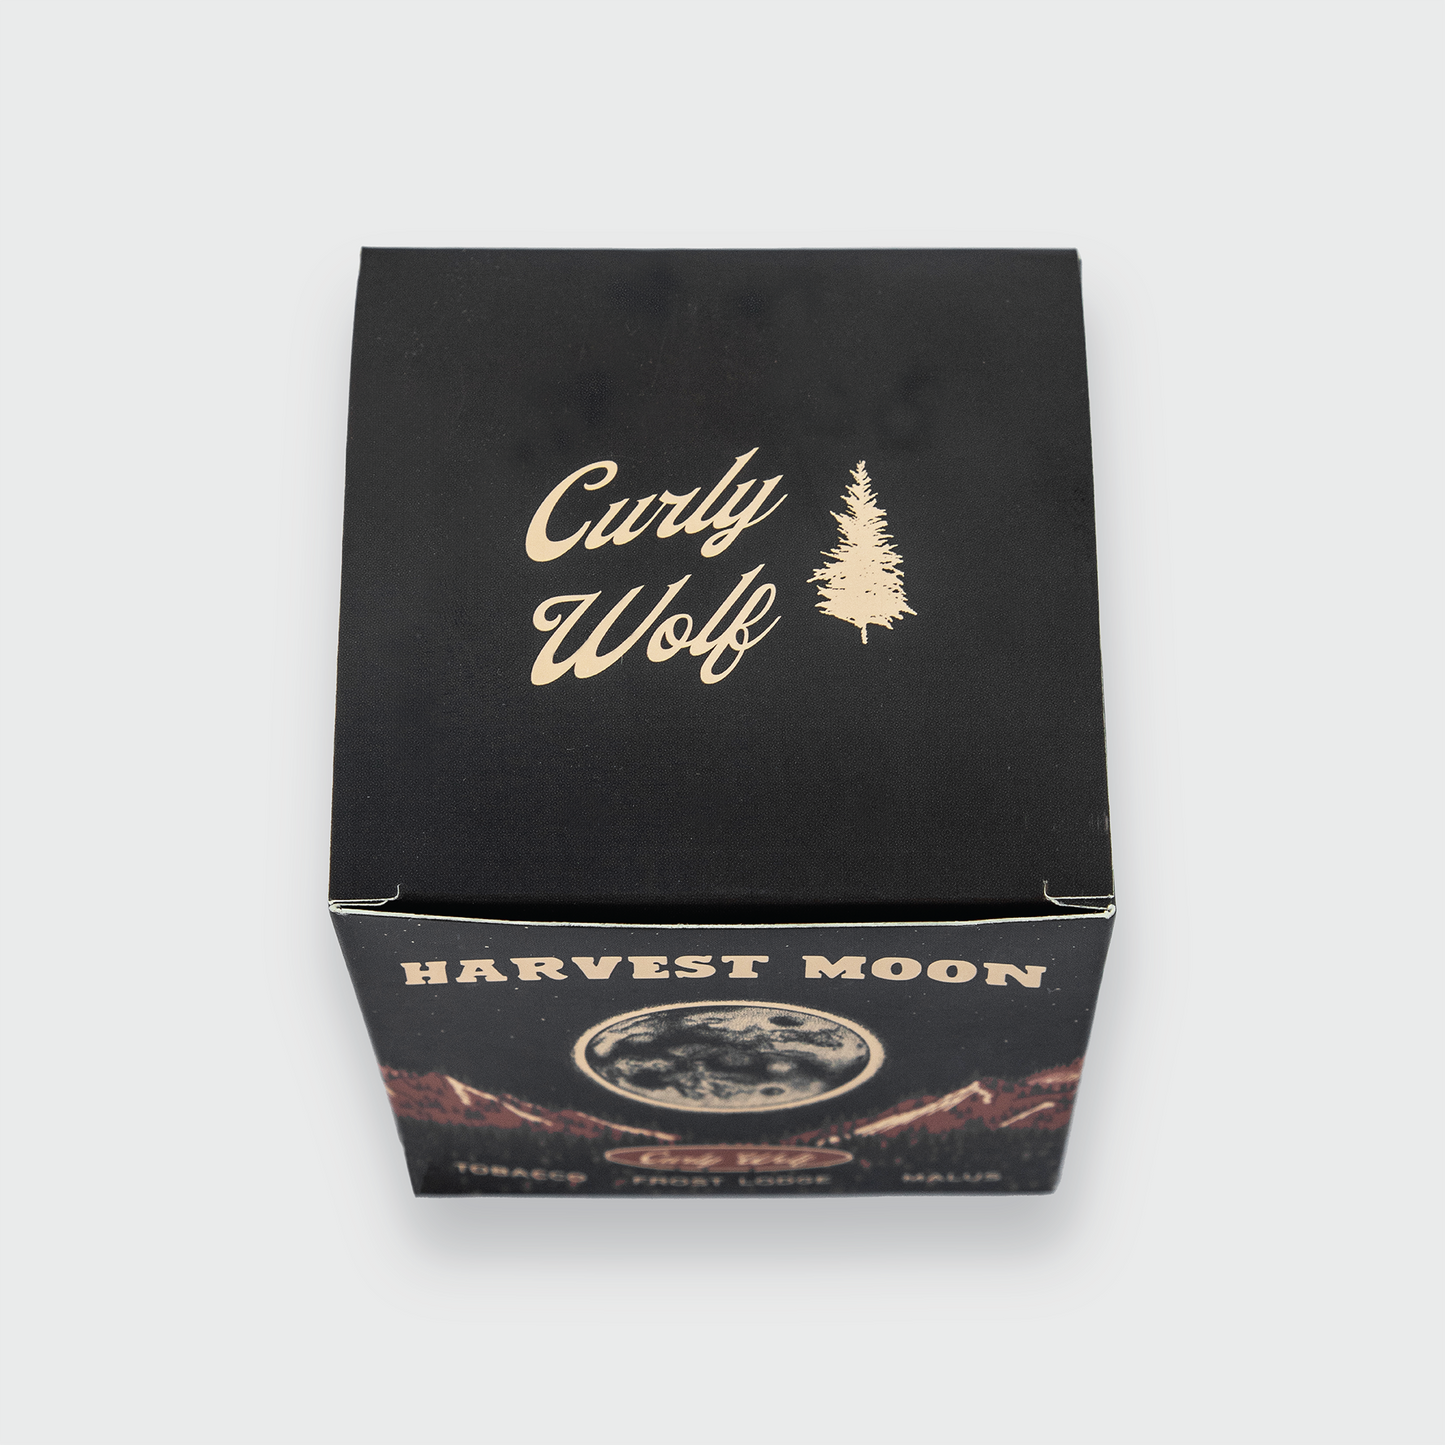 HARVEST MOON SOY WAX CANDLE